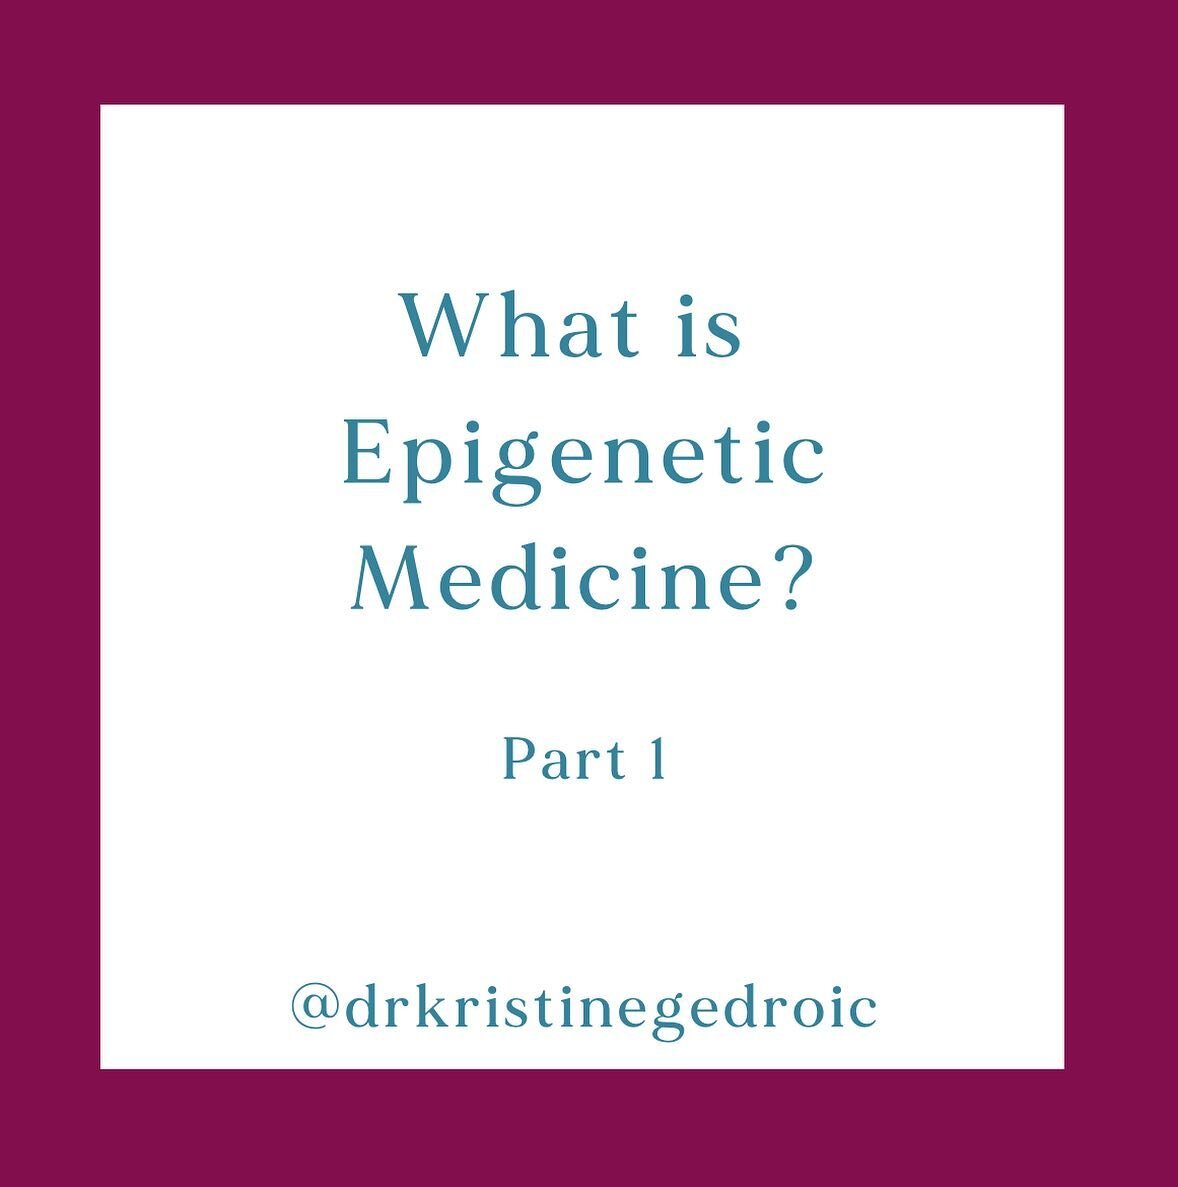 What do you think about epigenetics?